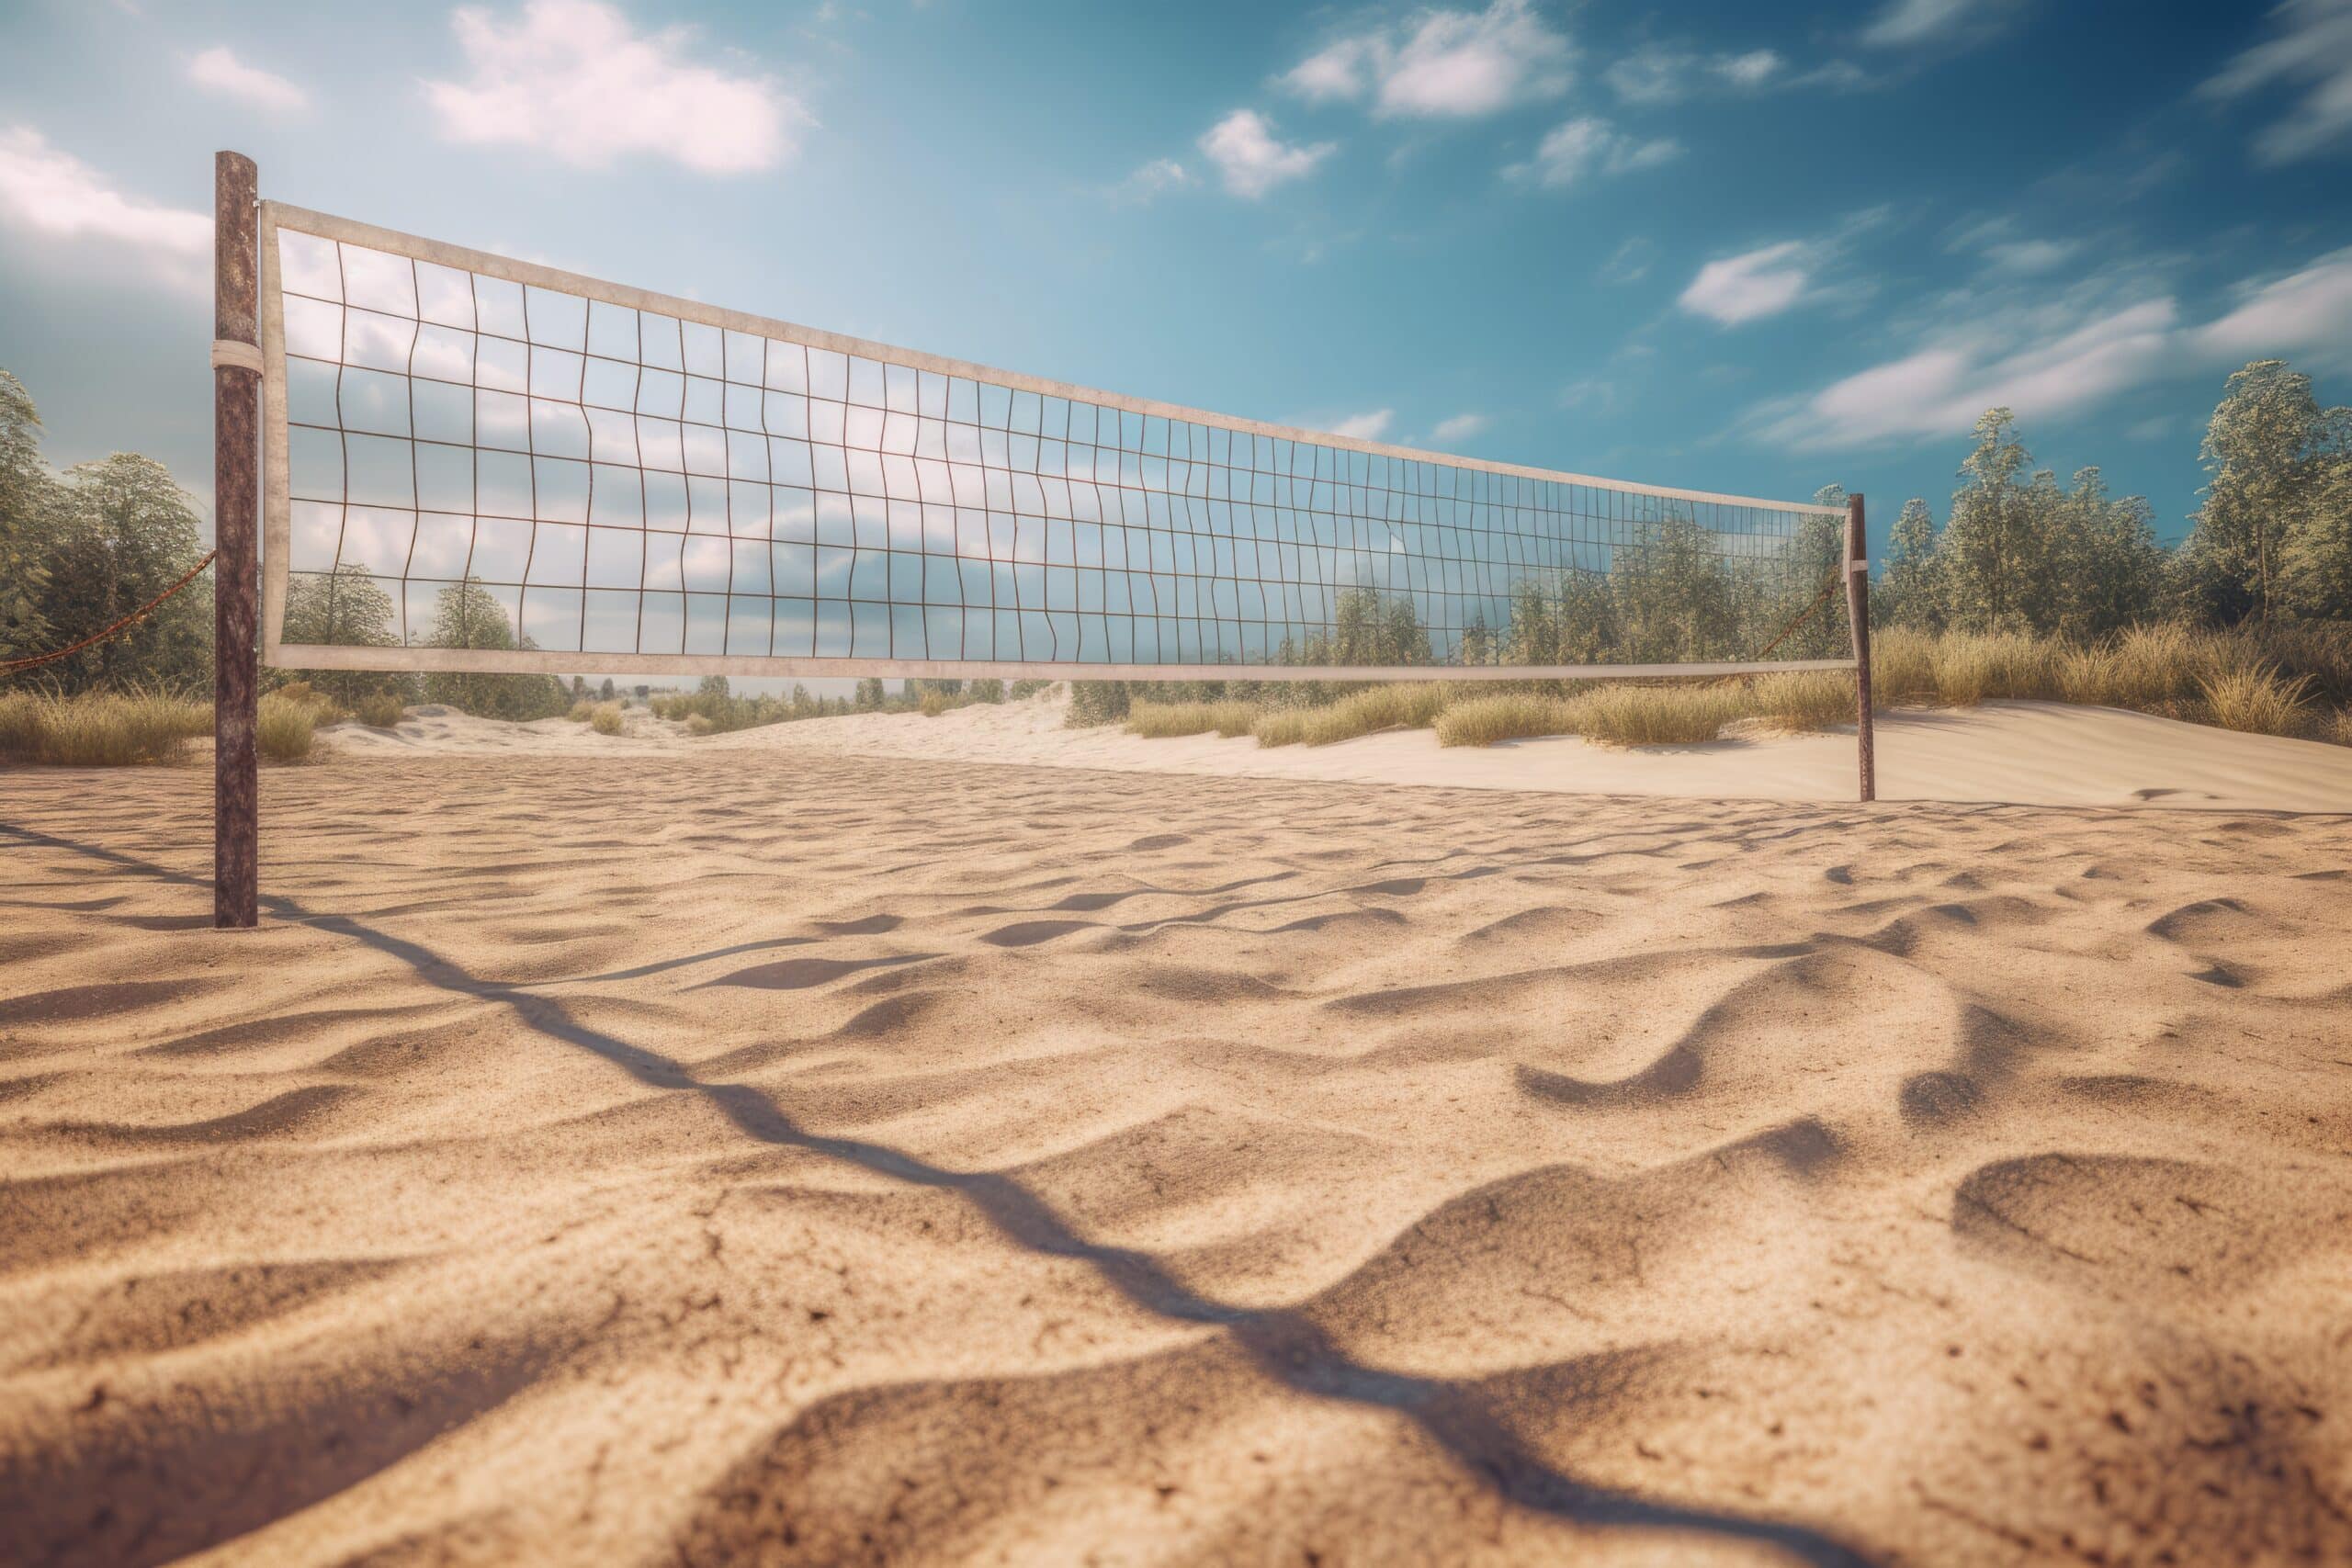 www.appr.com : What is volleyball called if played in sand?